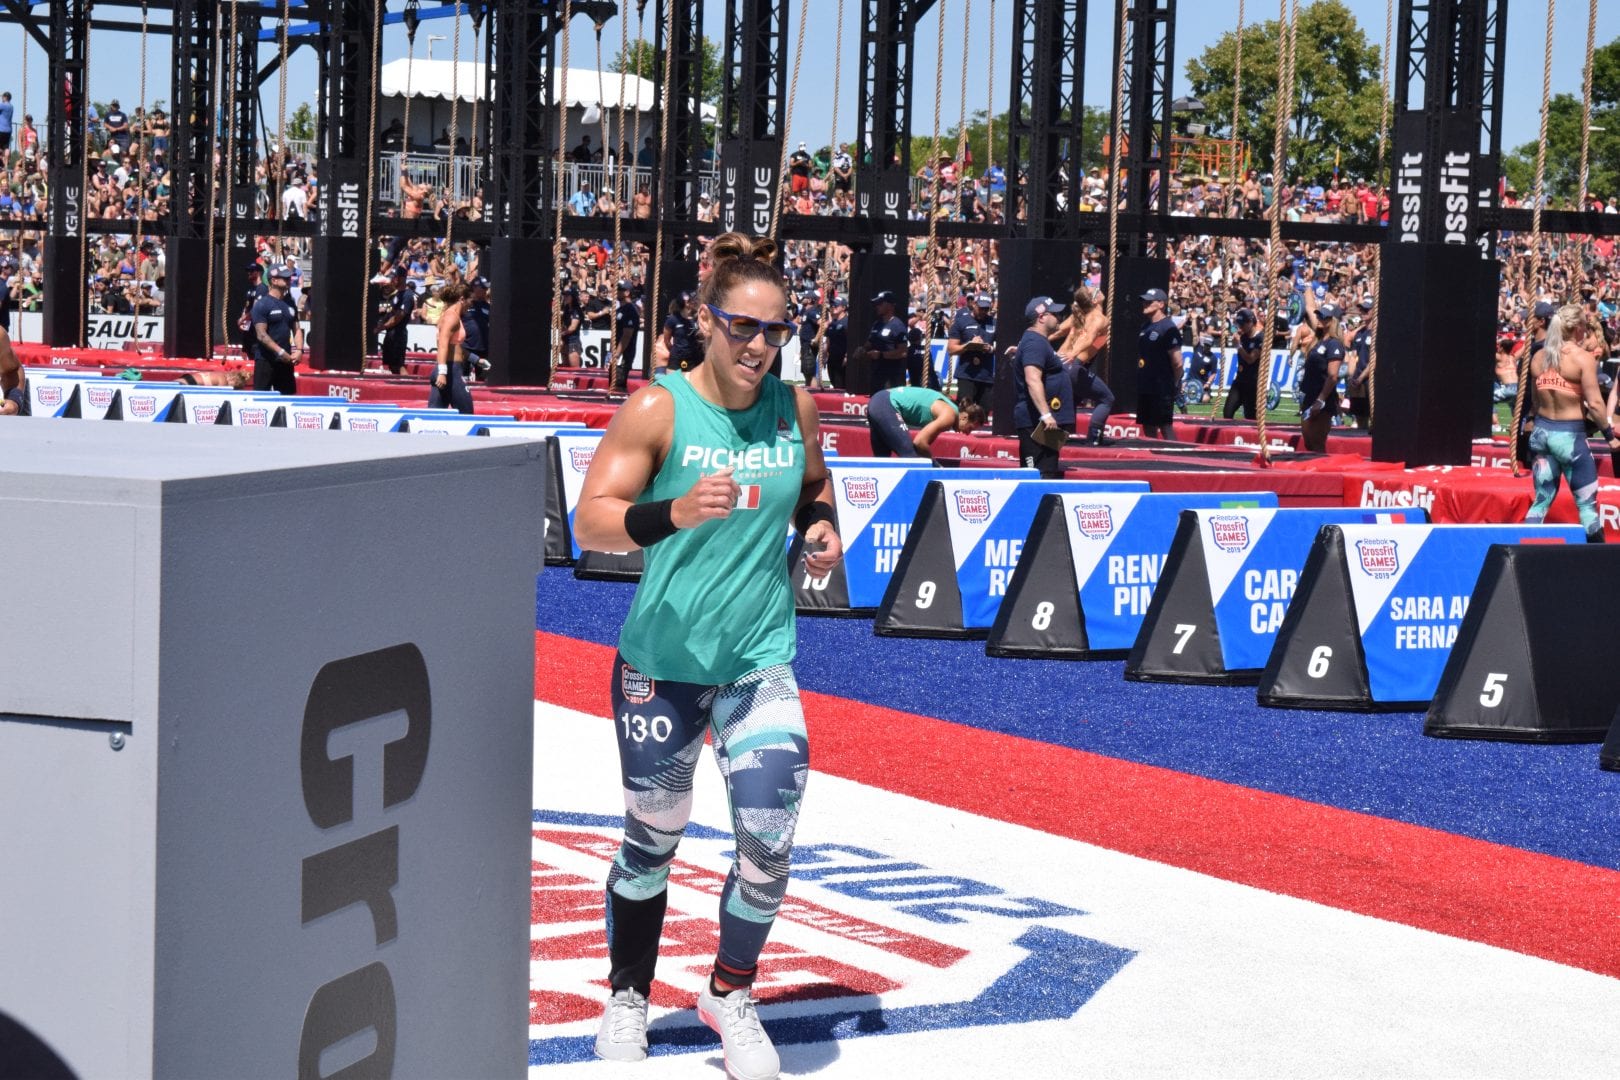 Alessandra Pichelli takes a lap between rounds of legless rope climbs at the 2019 CrossFit Games